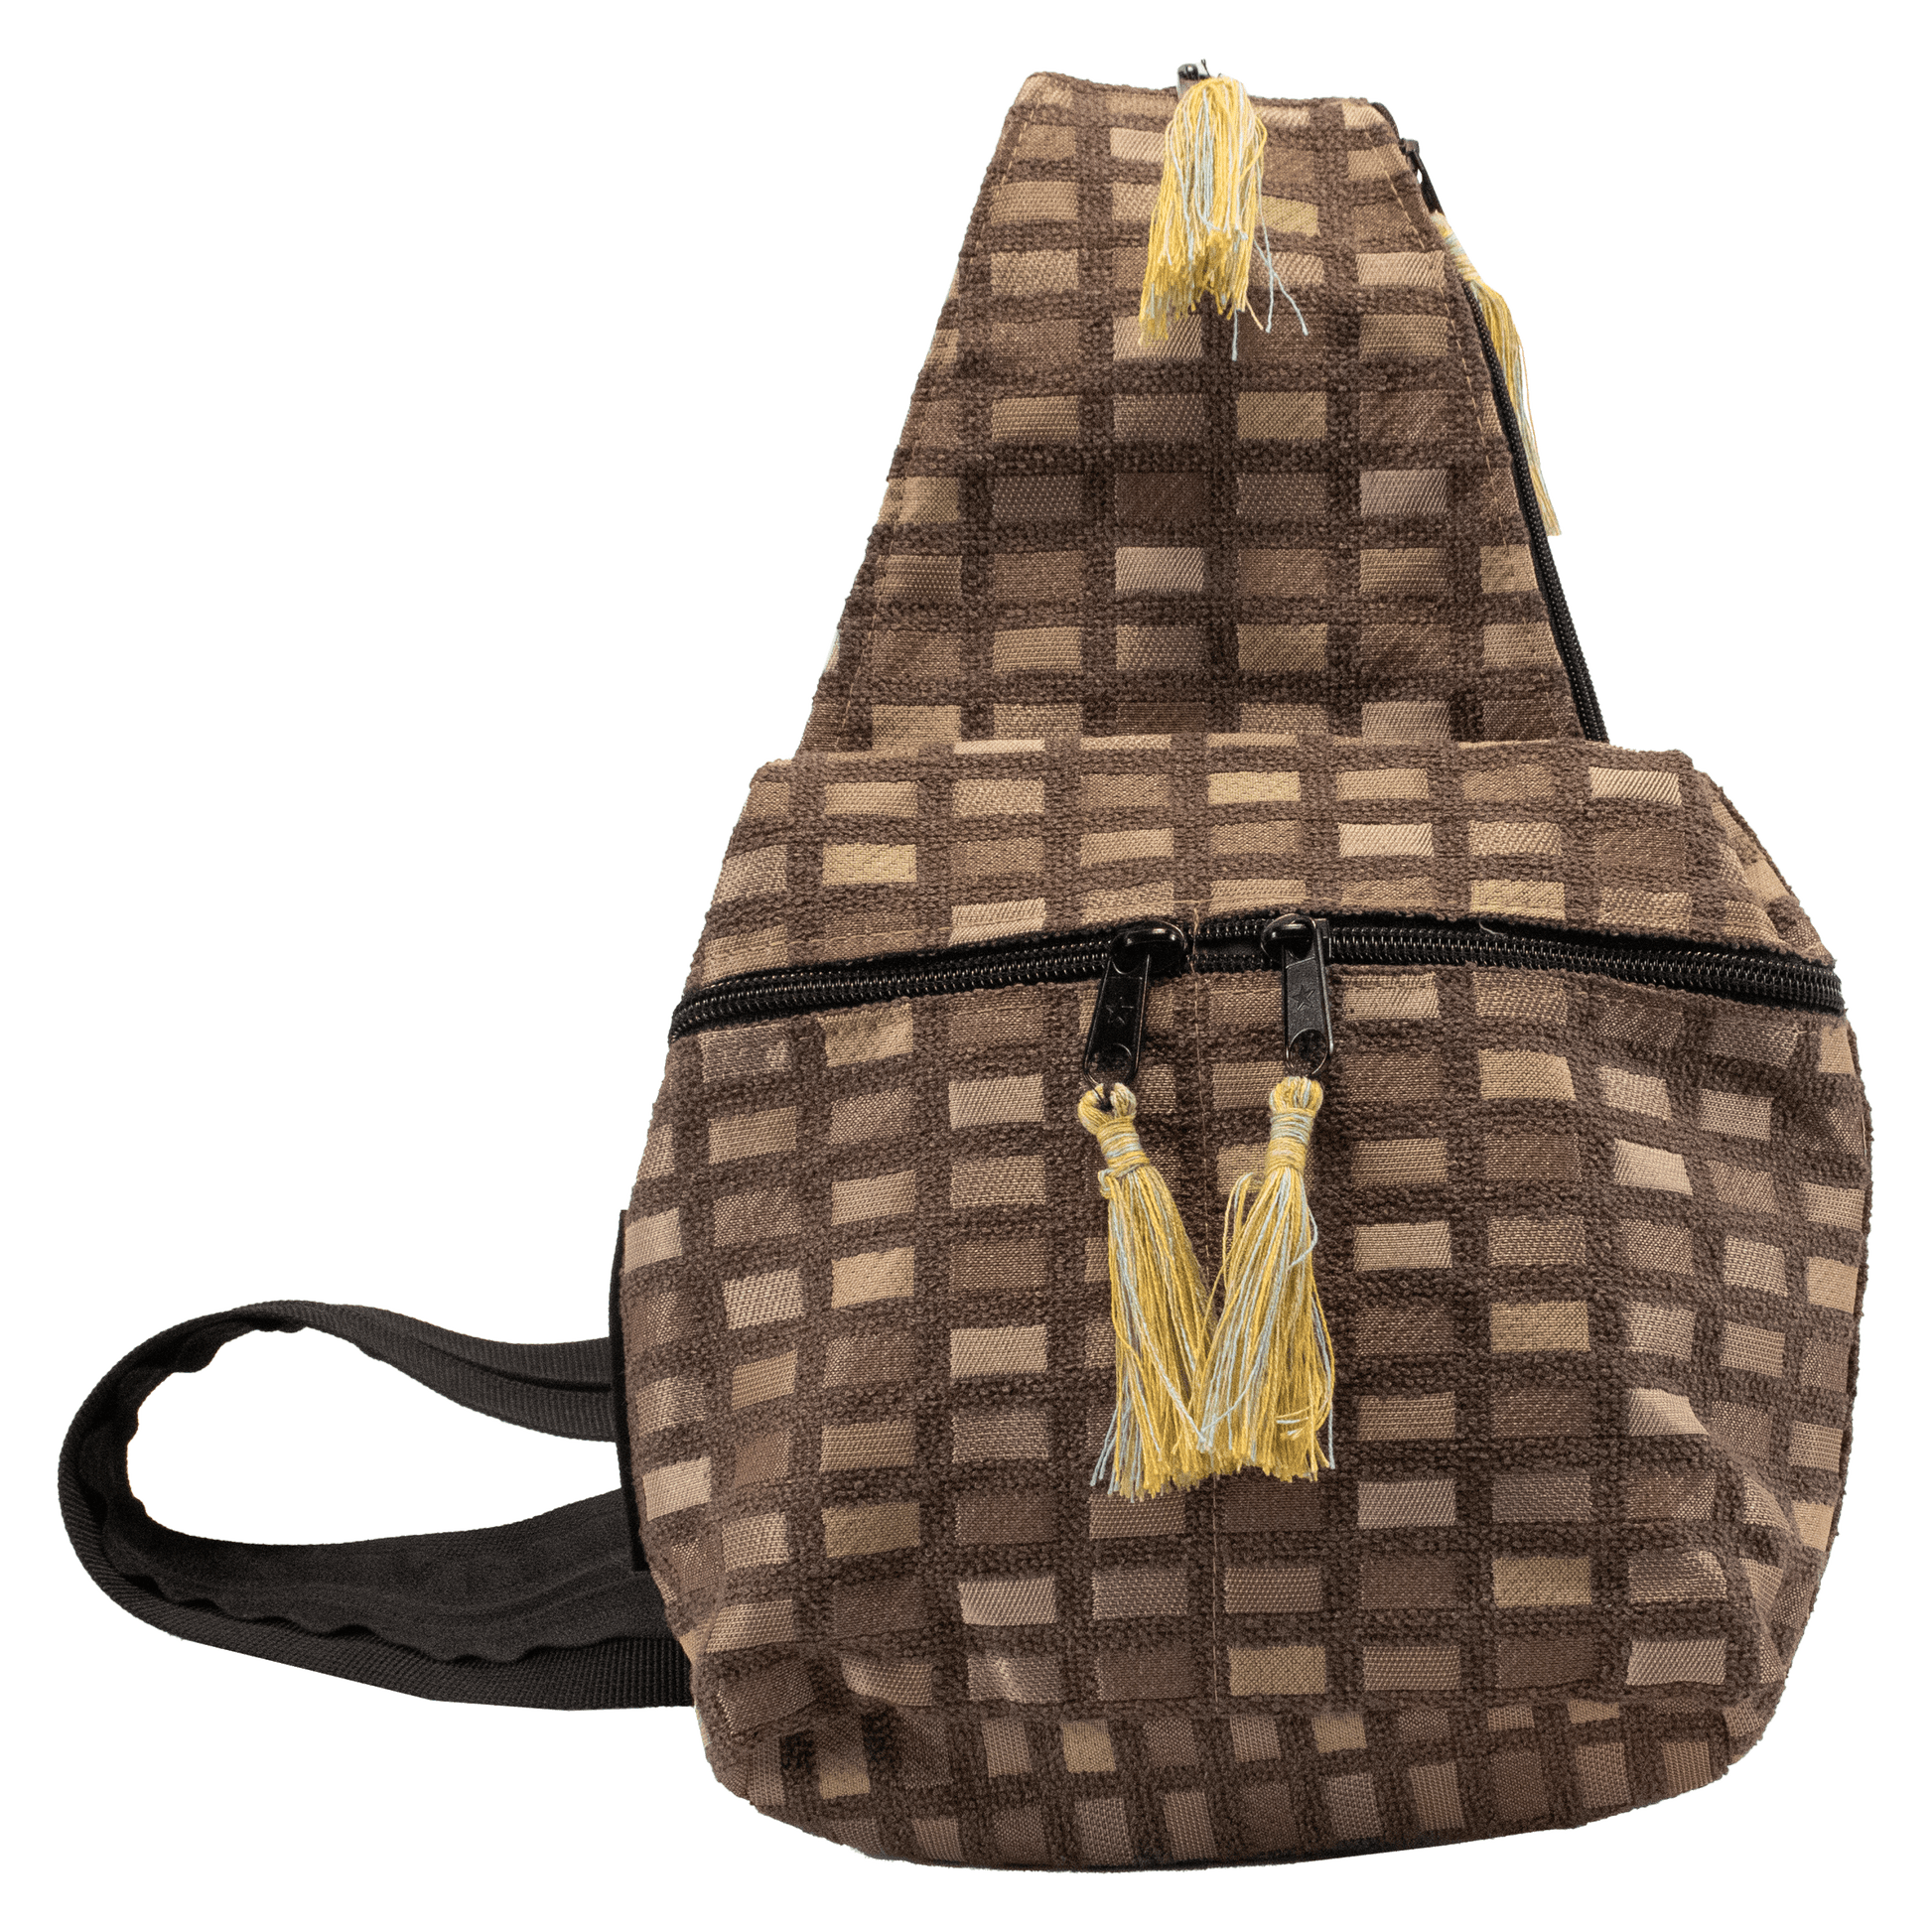 Small convertible backpack shoulder bag light brown with tan and brown shimmery tile pattern